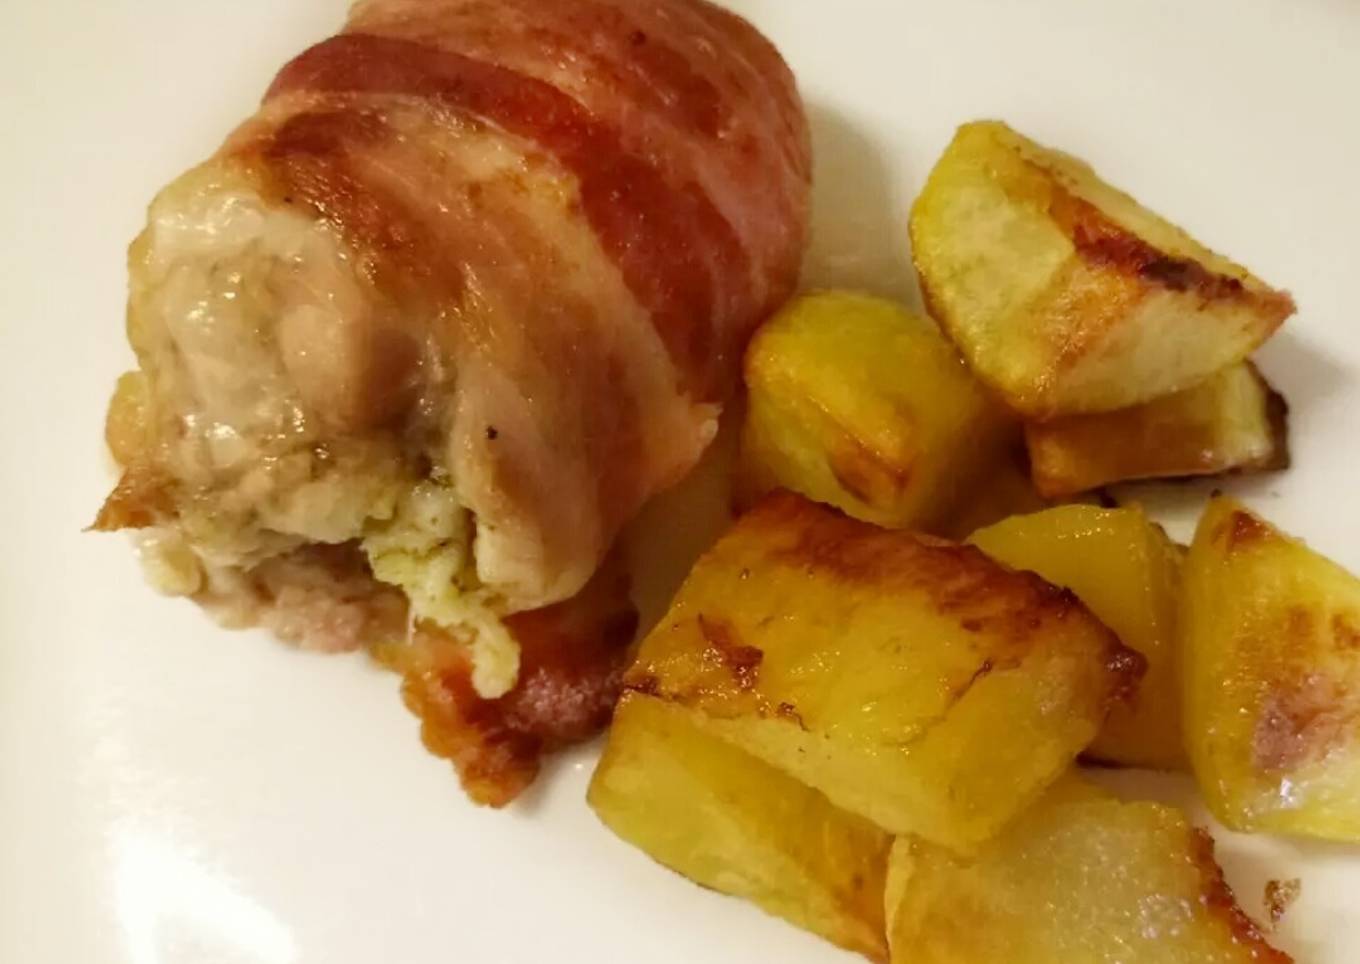 Sage and onion stuffed chicken thighs